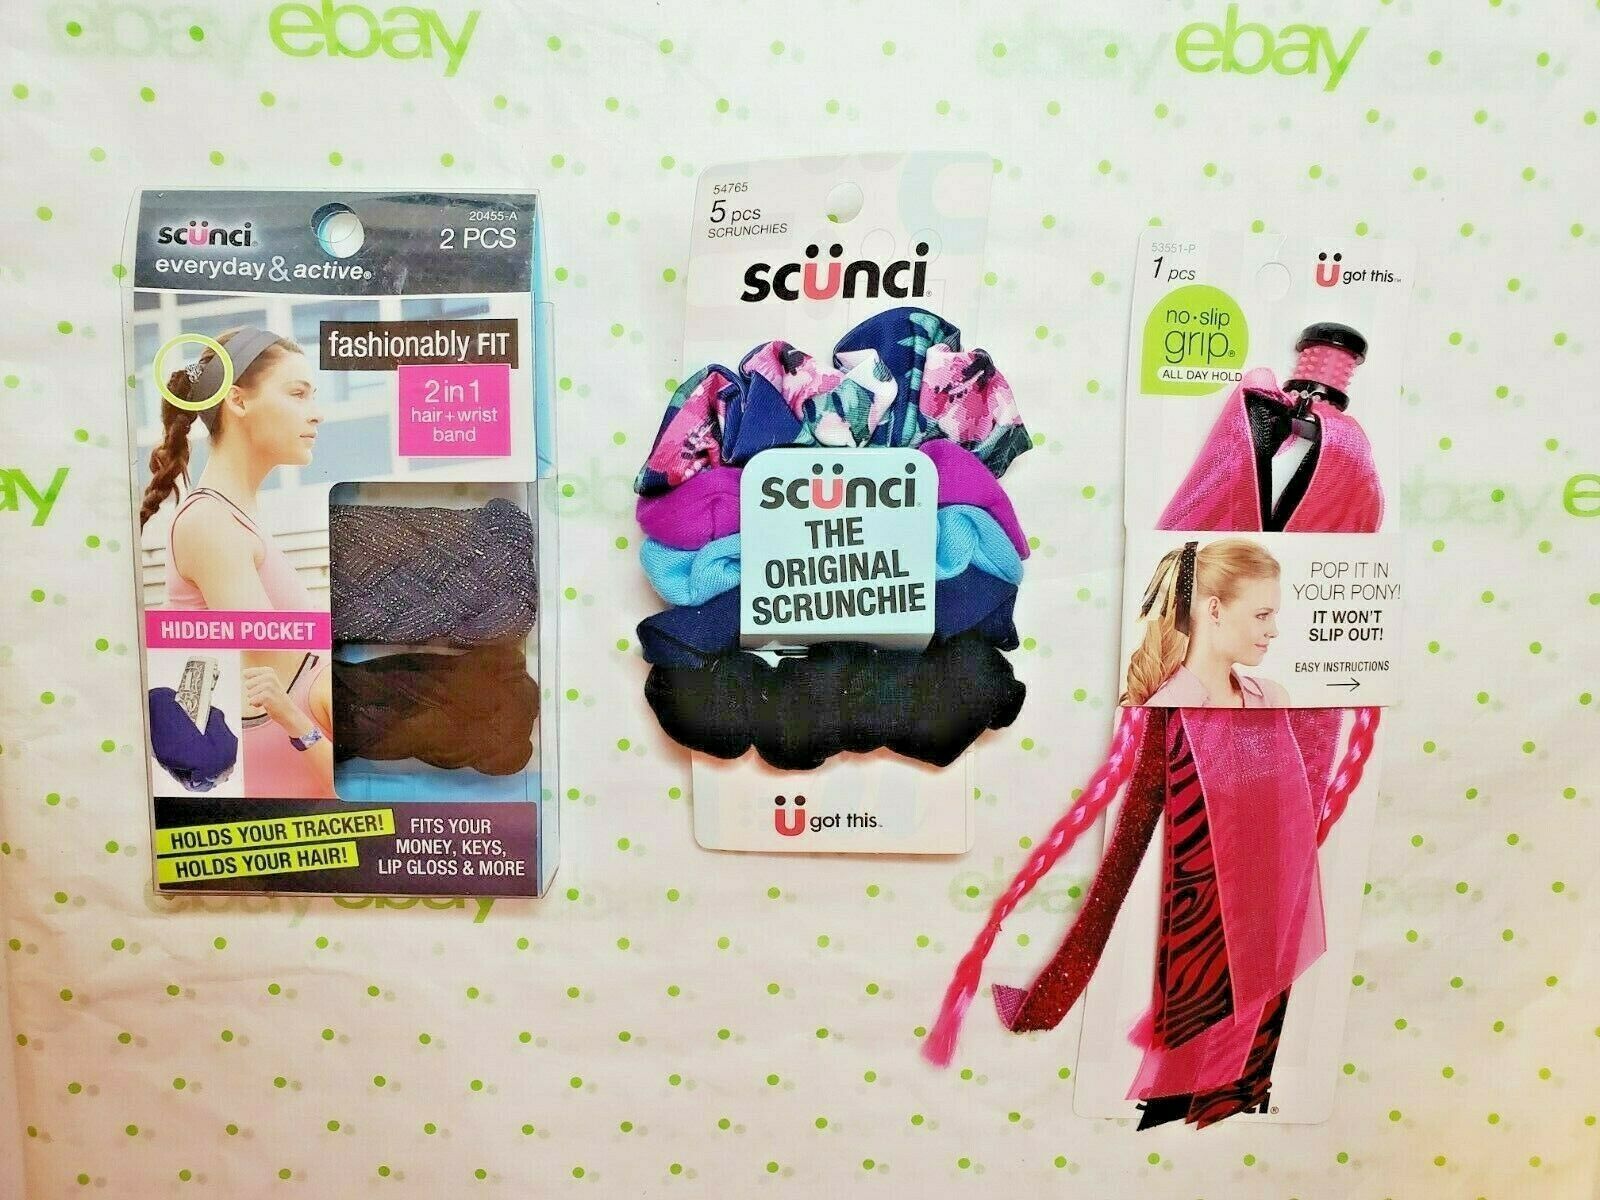 Scunci Set 2 in 1 Hair + Wrist Band 2 Pack Scrunchies & Pop It In Your Pony Pink